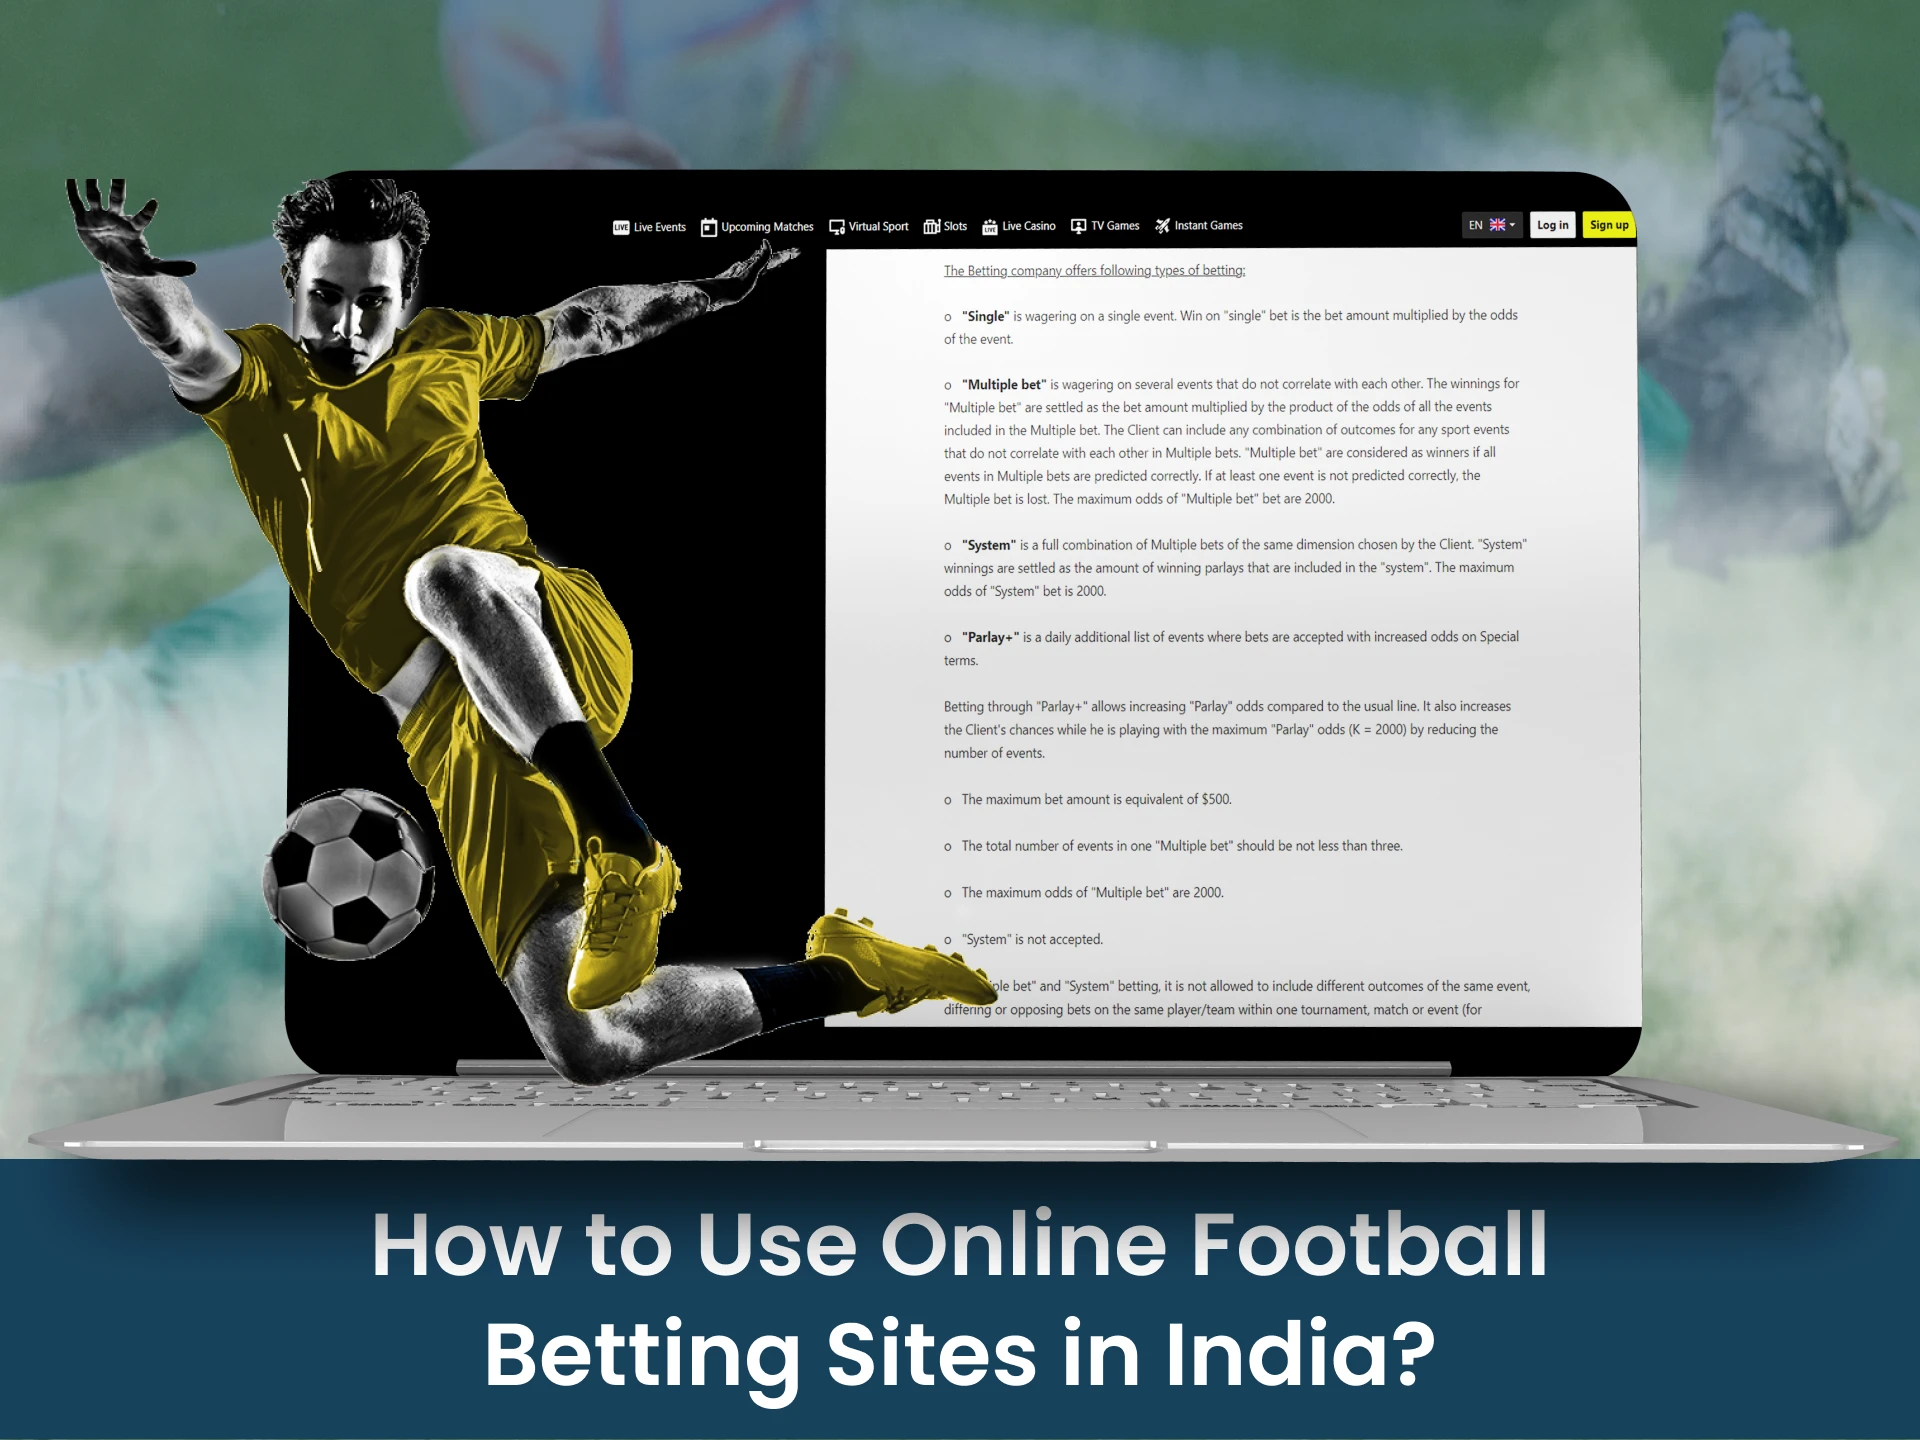 Sign up for a chosen betting website, top up the account and place a bet.